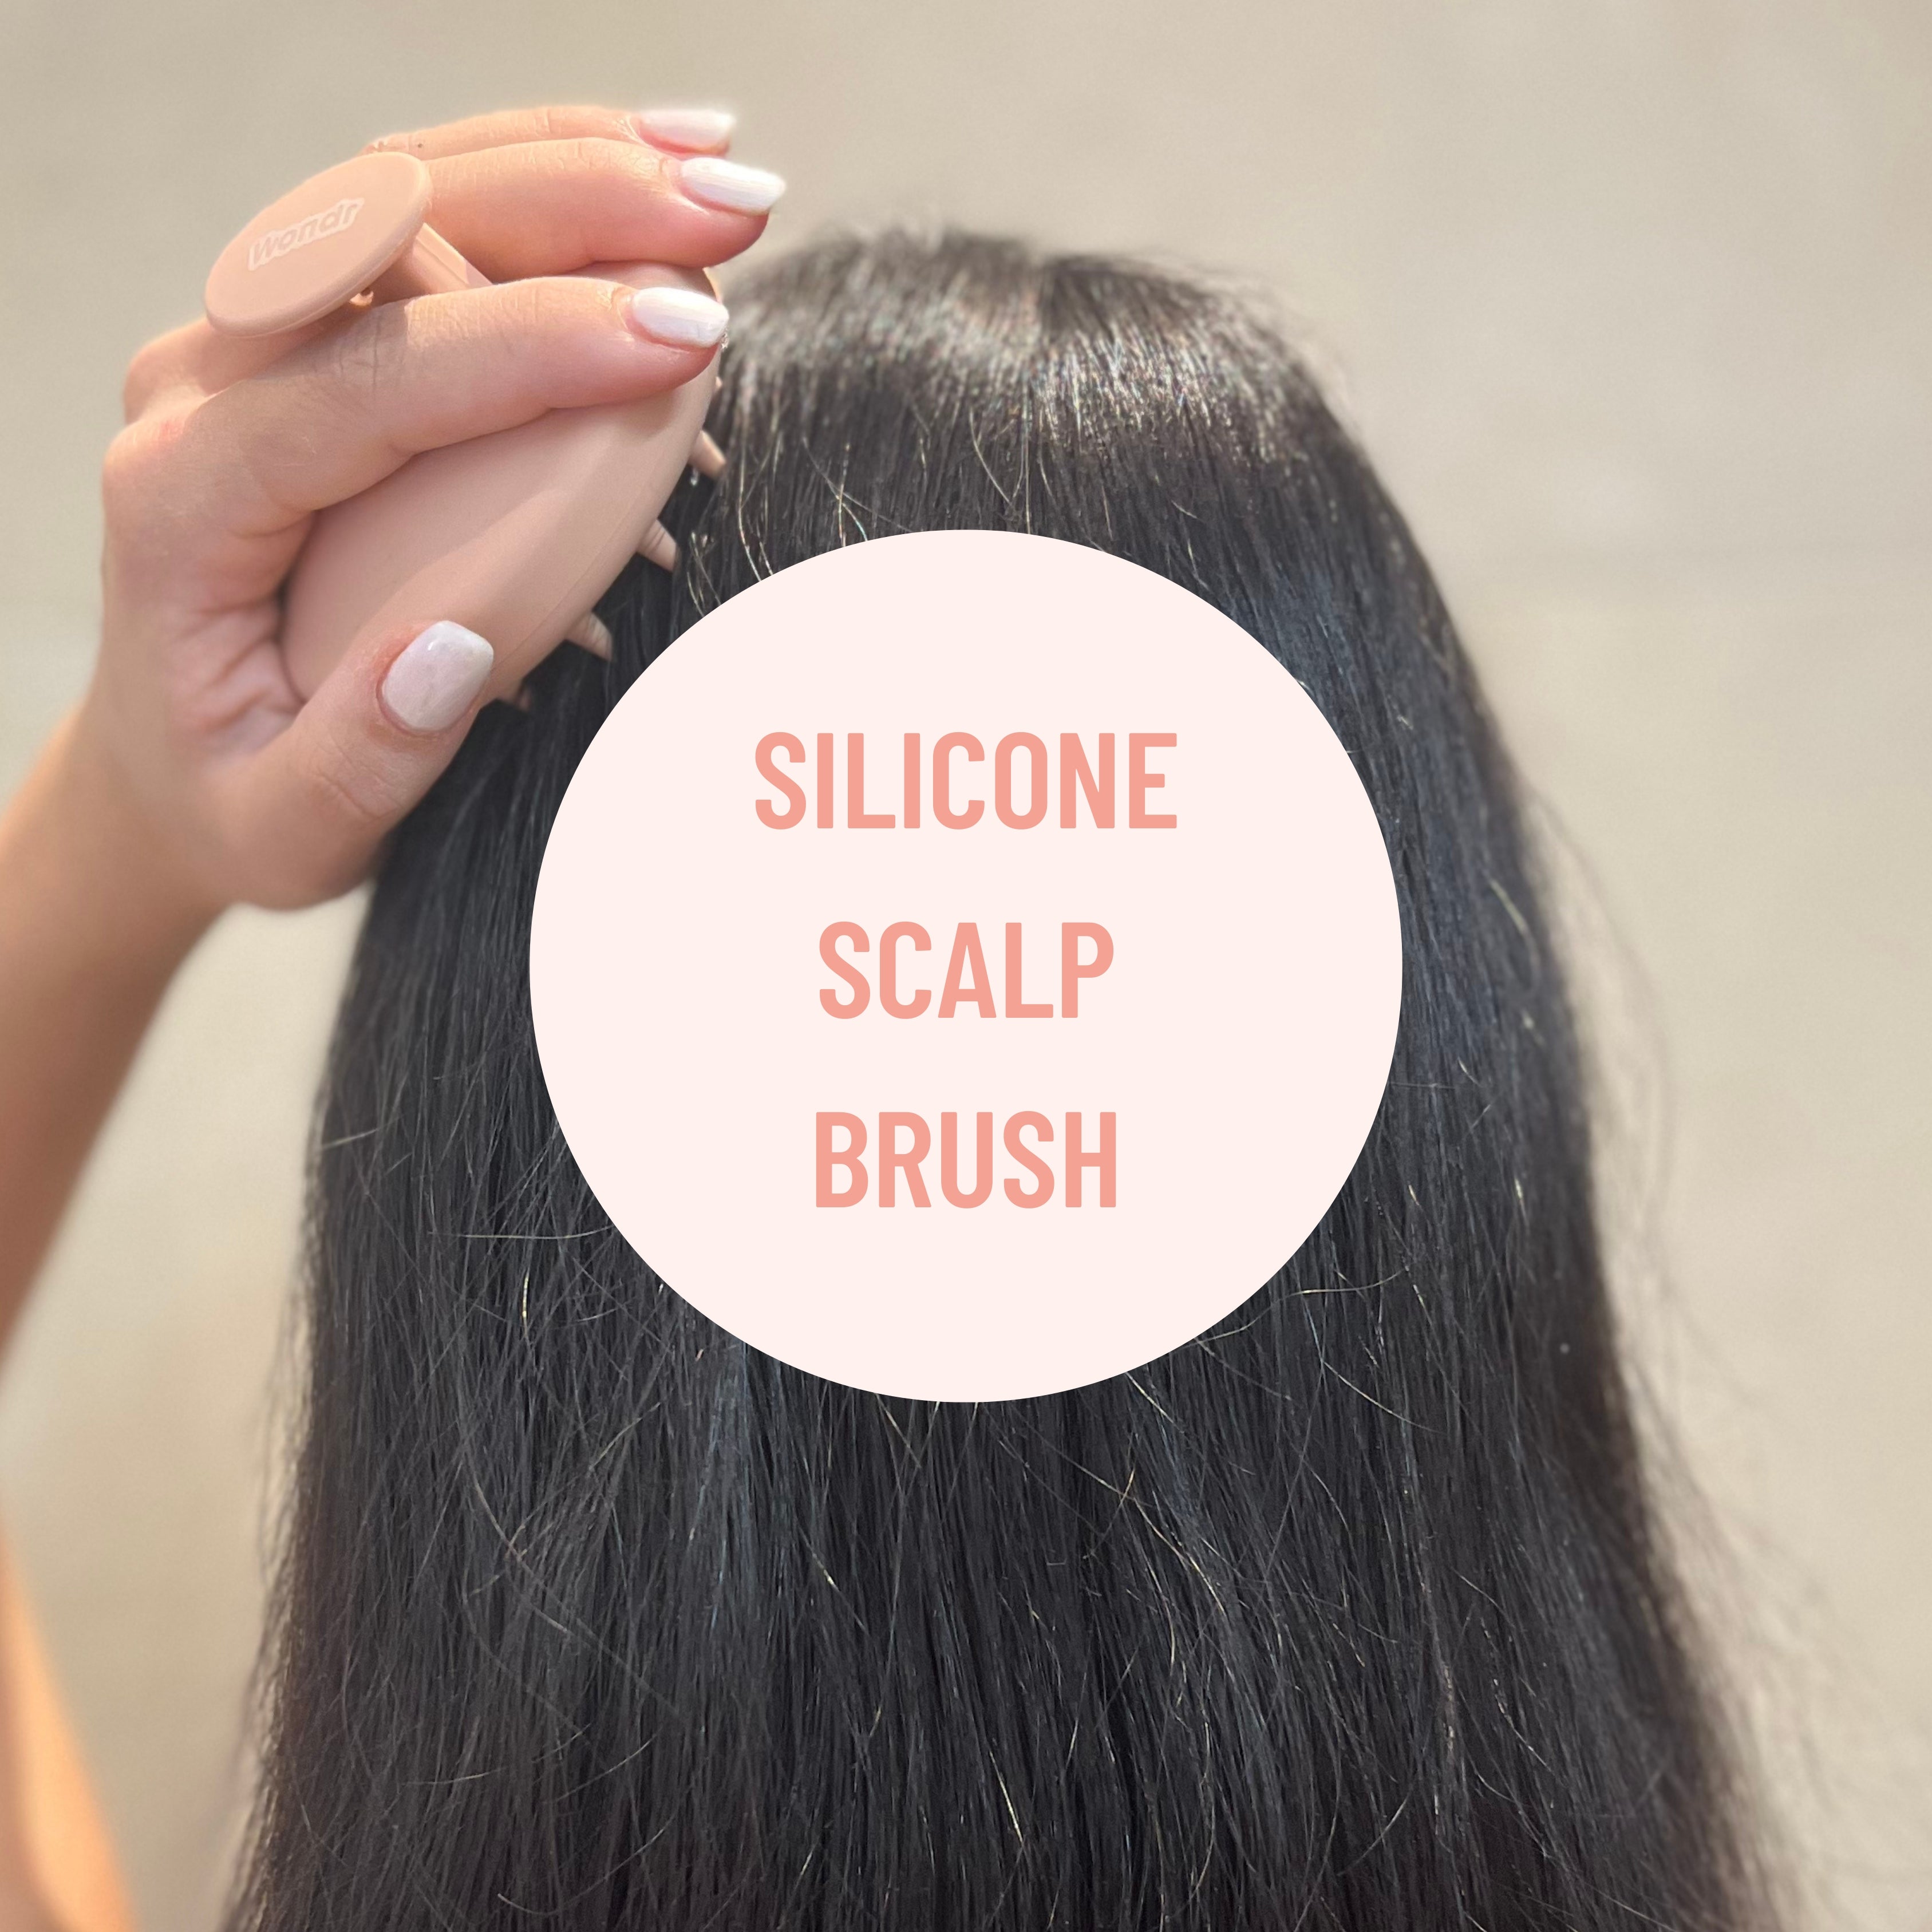 6 reasons why a silicone scalp brush ensures a healthier scalp